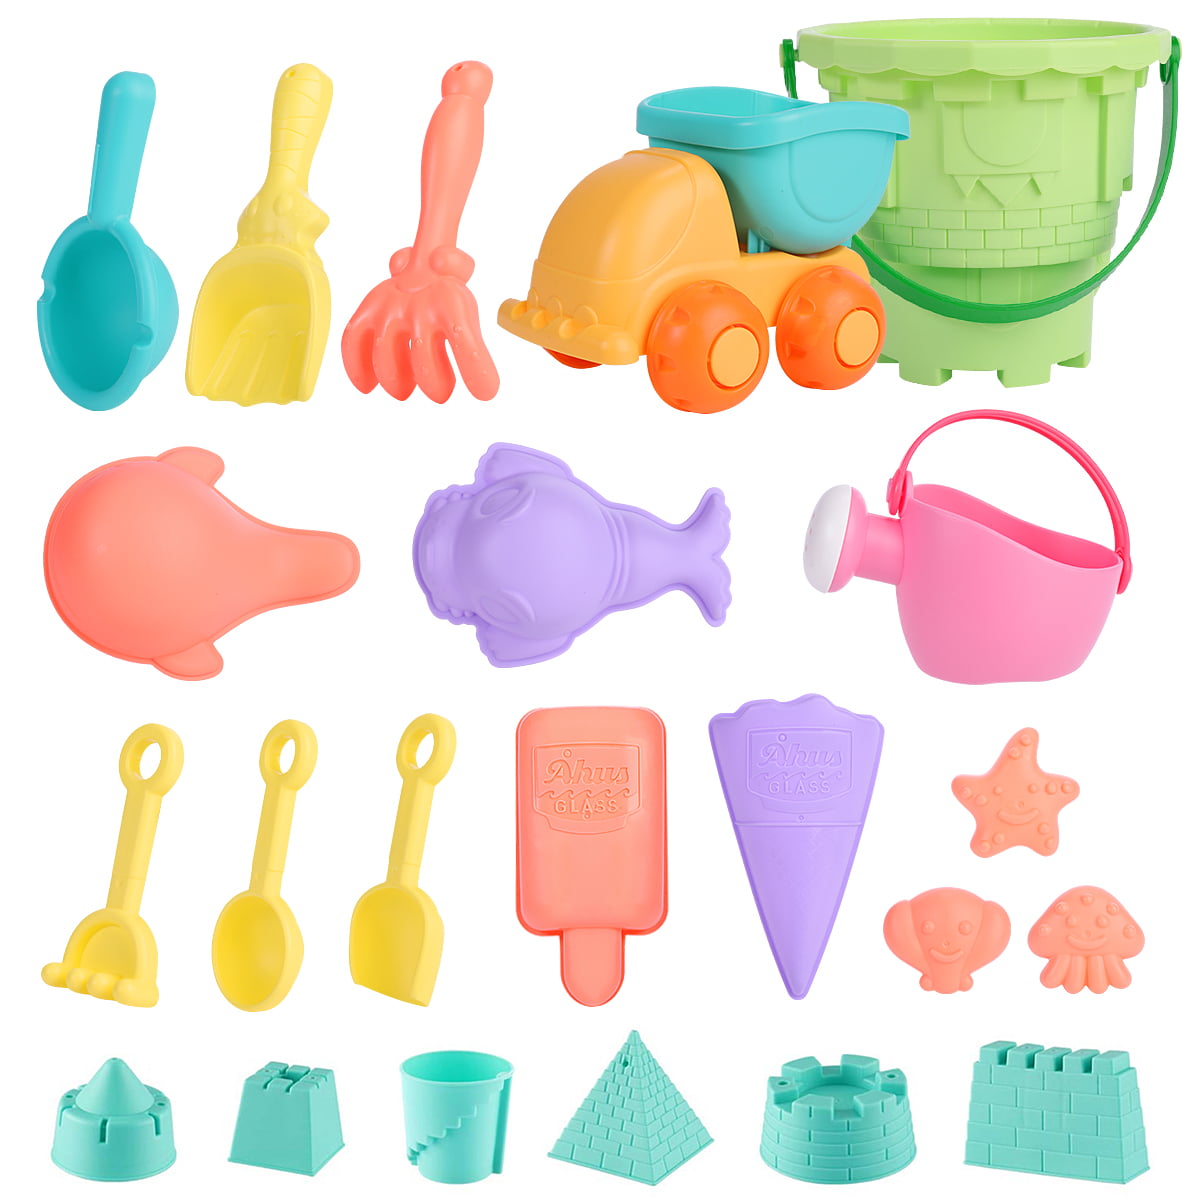 Animal Sand Molds Molds Watering Can Shovel Tool Kit Decsun 25pcs Beach Toys Sand Toys Set for Kids with Water Wheel Bucket Summer Beach Castle Kit Outdoor Toys for Boys & Girls 